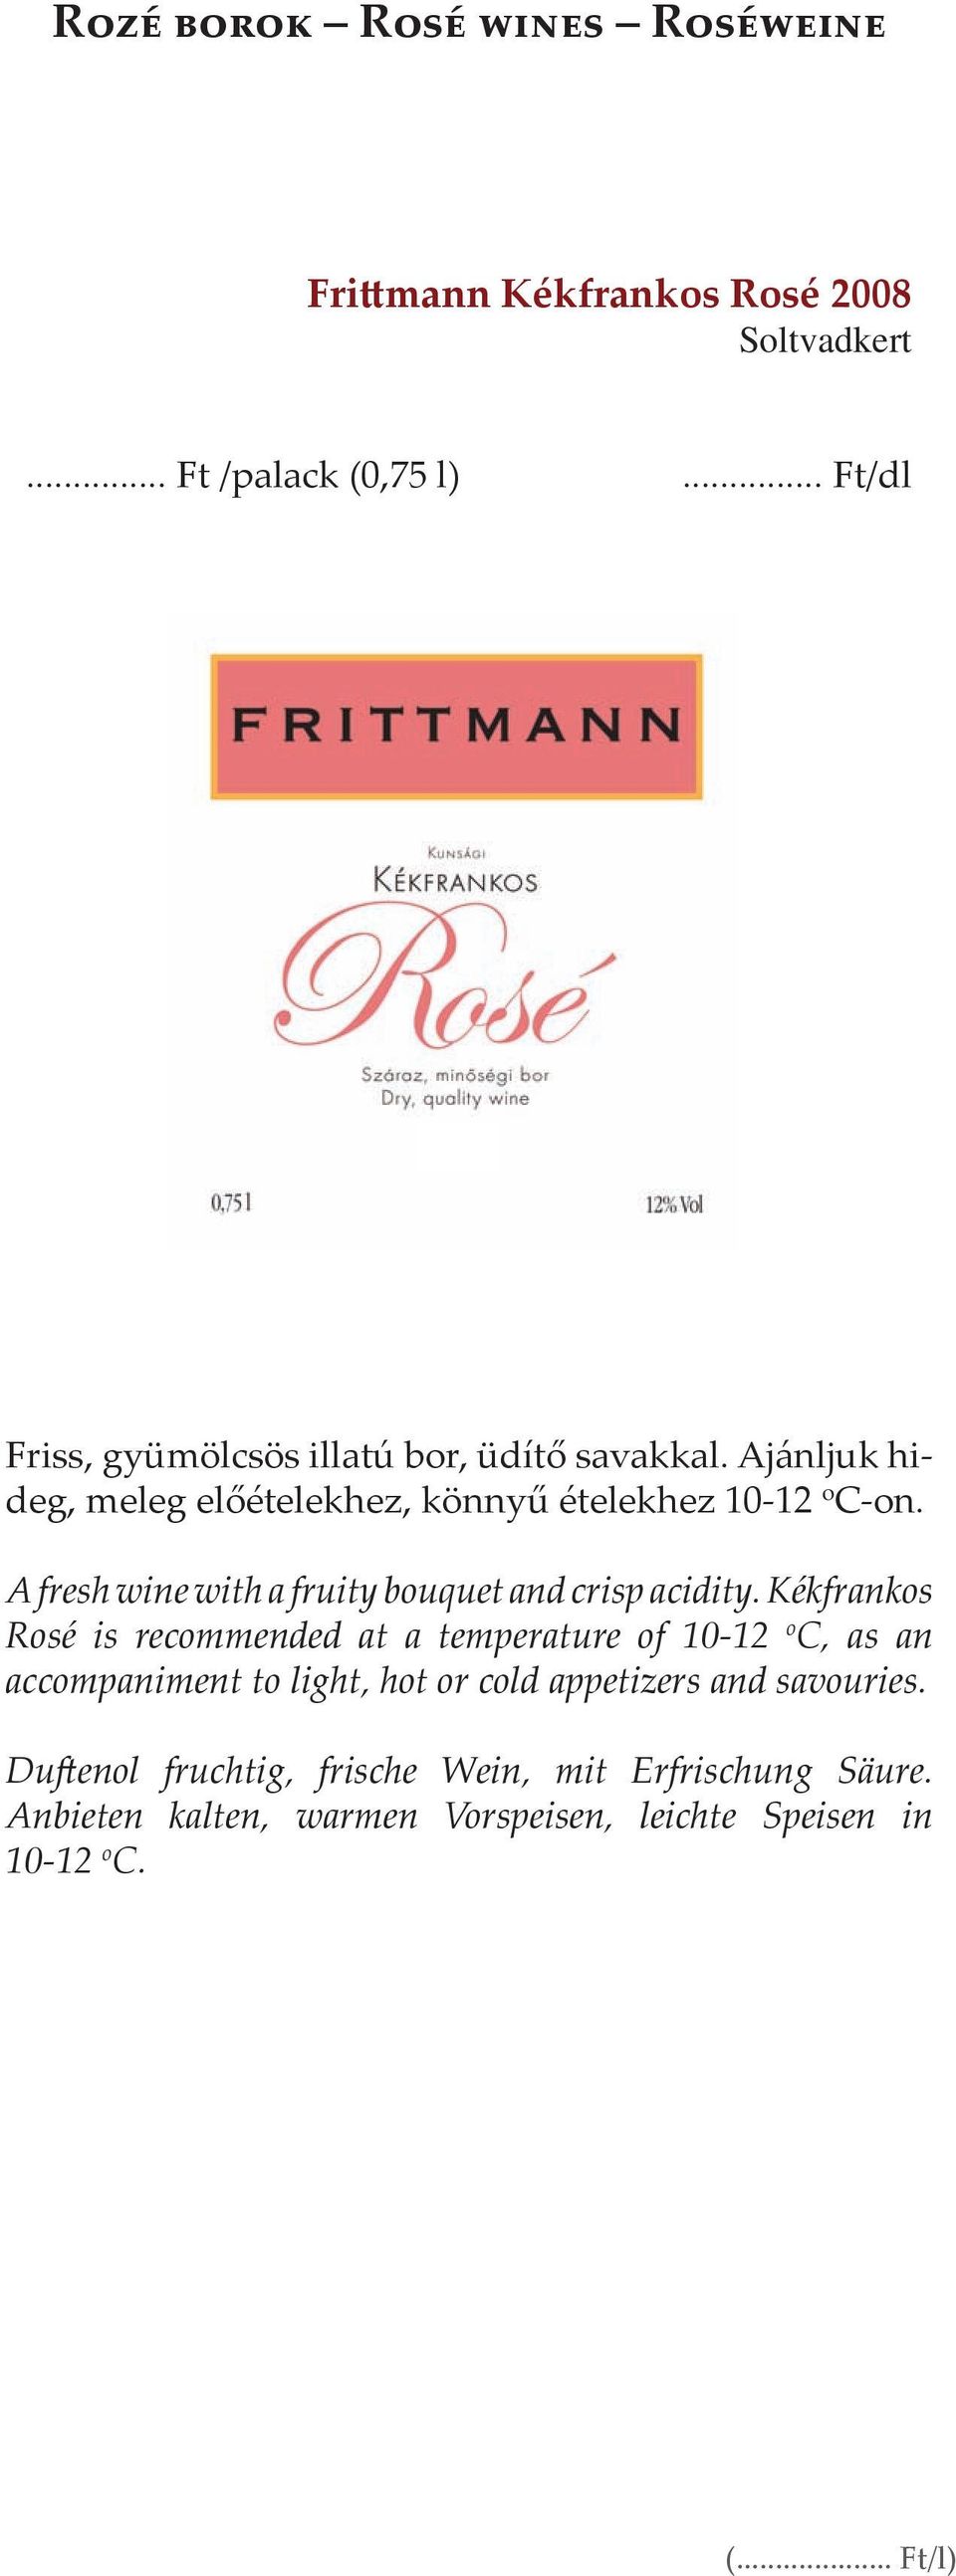 Kékfrankos Rosé is recommended at a temperature of 10-12 o C, as an accompaniment to light, hot or cold appetizers and